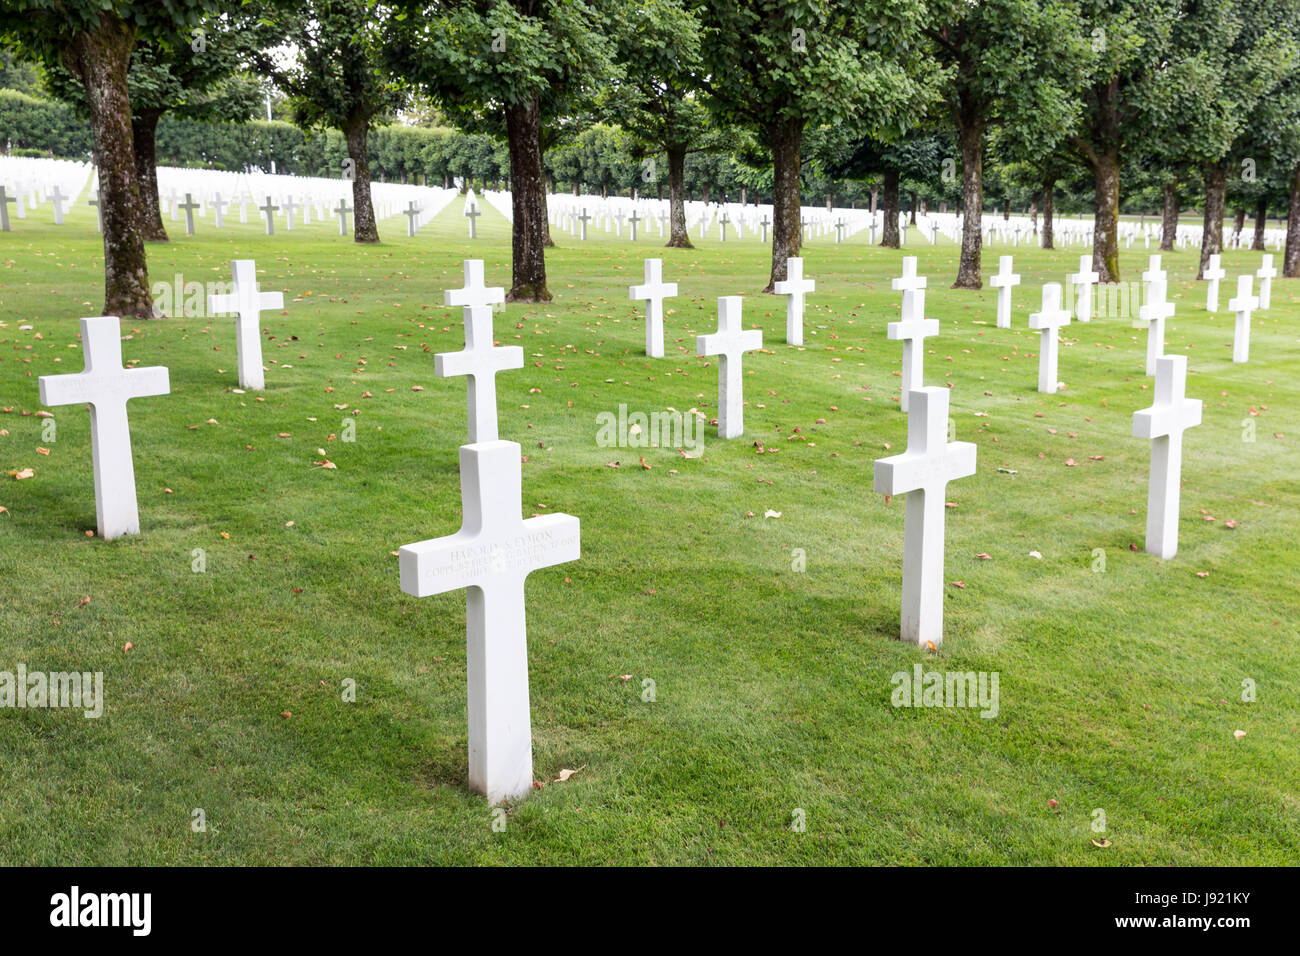 VERDUN, FRANCE - AUGUST 19, 2016: American cemetery near Romagne-sous-Faucon for First World War One soldiers who died at Battle of Verdun Stock Photo